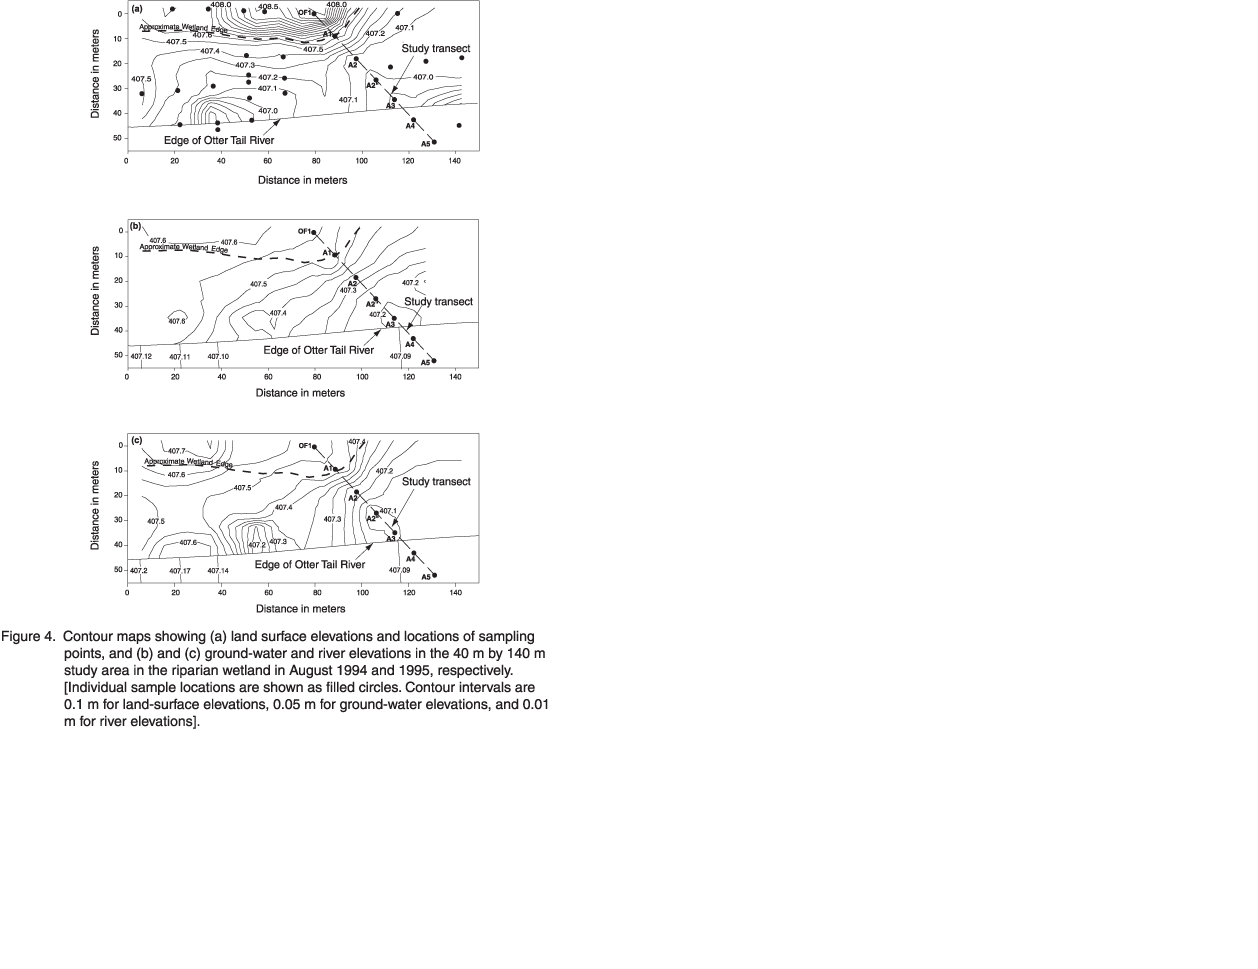 Contour maps showing (a) land surface elevations and
locations of sampling points, and (b) and (c) ground-water and river elevations
in the 40 m by 140 m study area in the riparian wetland in August 1994 and 1995,
respectively.